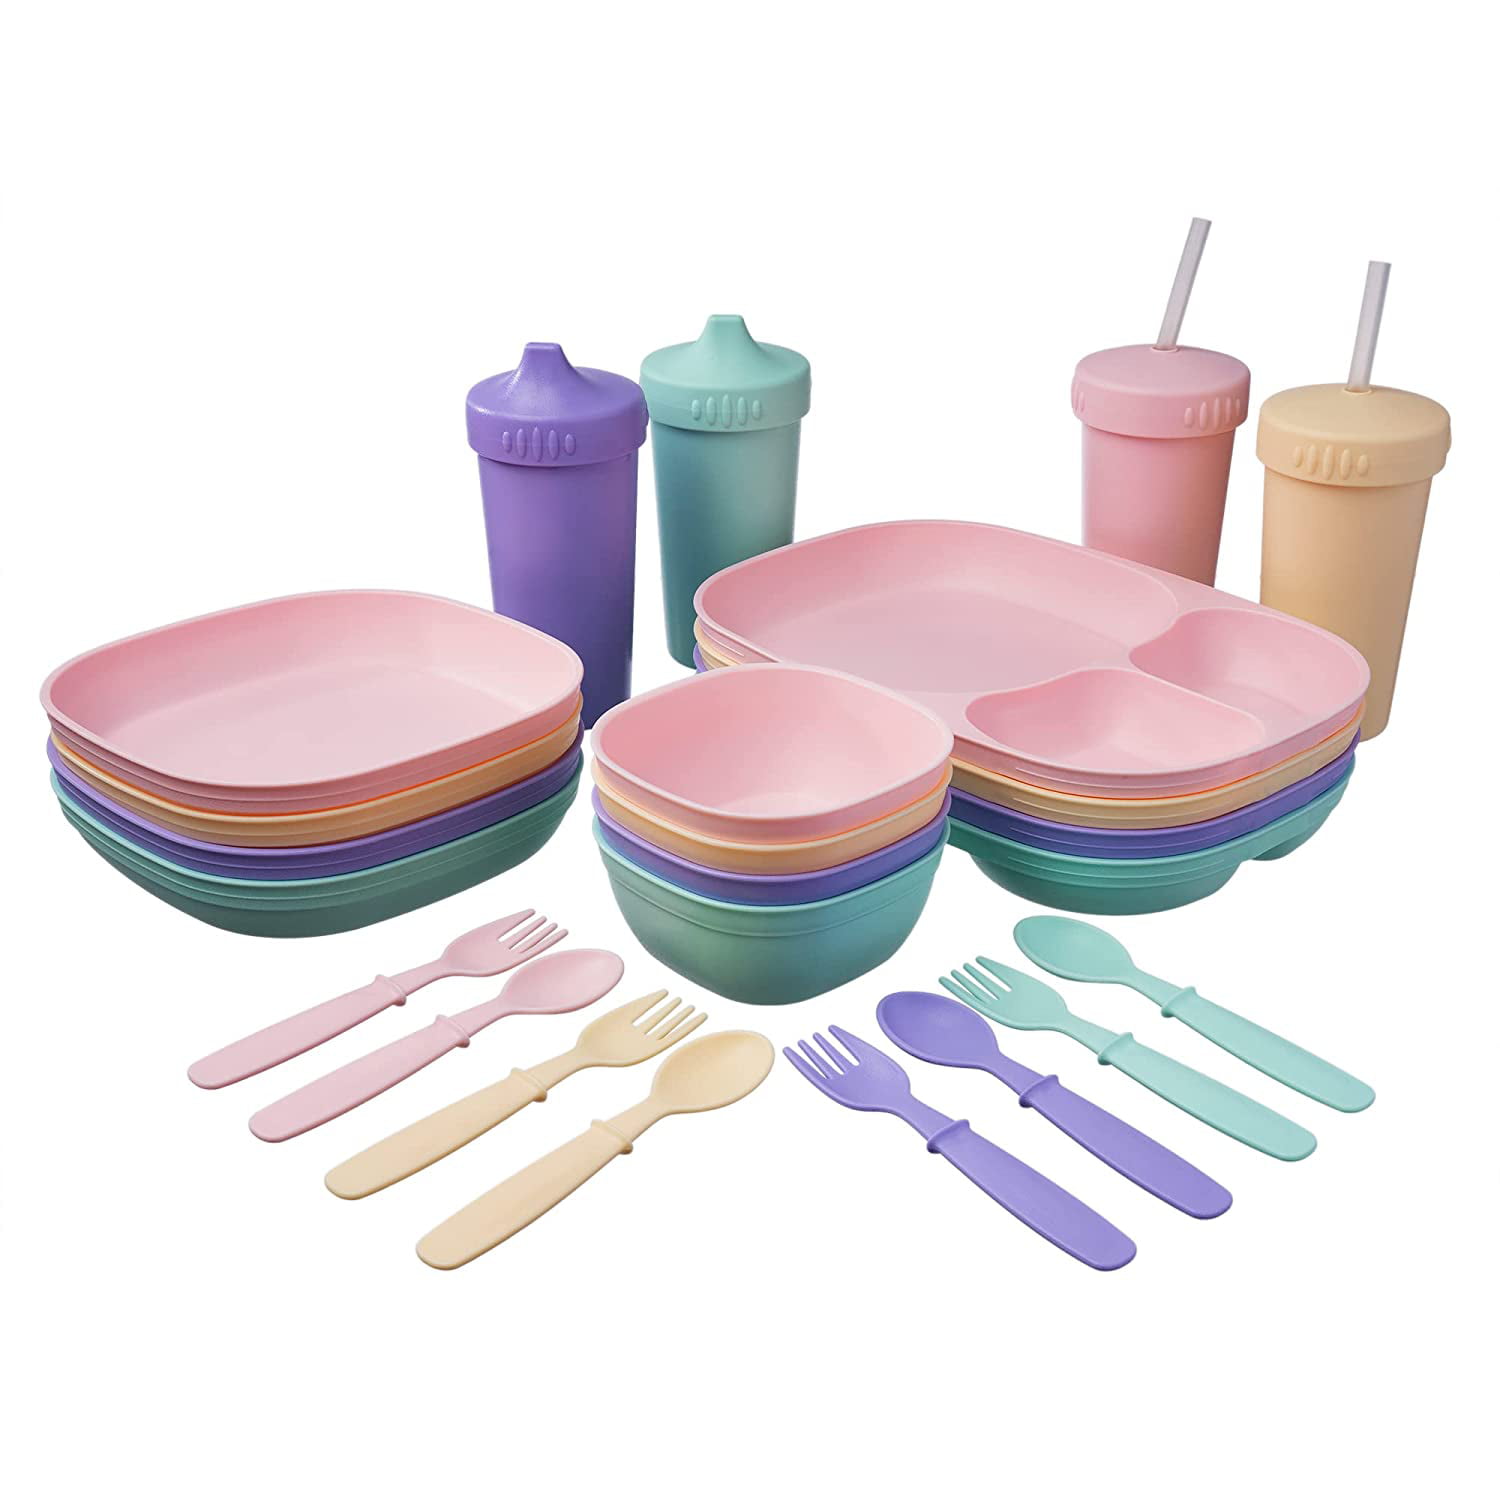 Kids Girls Unicorn Cutlery Dinner Set Mealtime Plastic Bowl Cup Plate Lunch Bag 